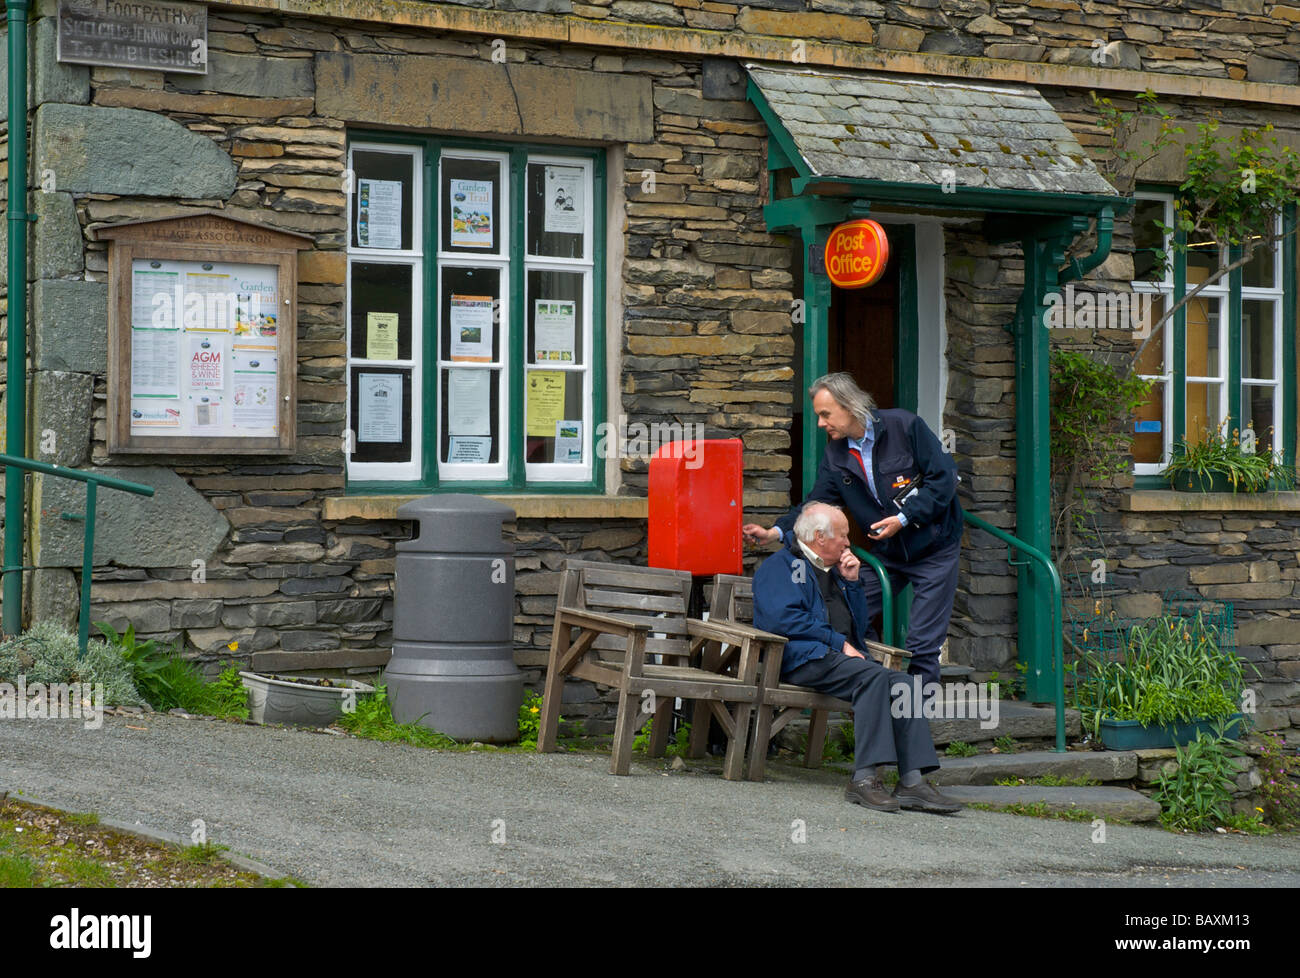 Postman emptying postbox at Troutbeck Post Office, Lake District National Park, Cumbria, England UK Stock Photo